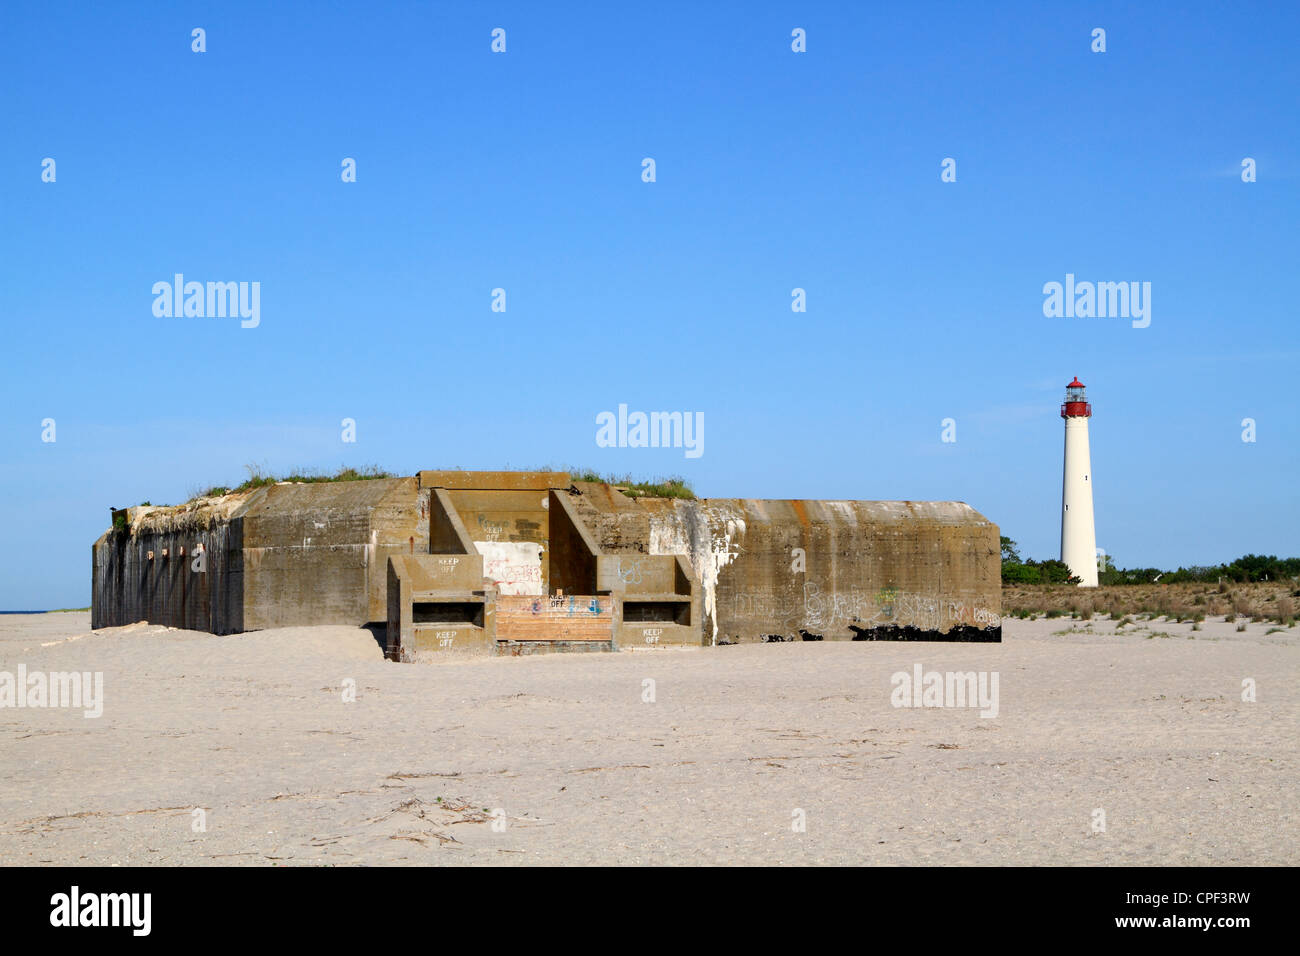 World War II artillery bunker on the beach in Cape May, New Jersey, USA. The Cape May Lighthouse can be seen to the right. Stock Photo